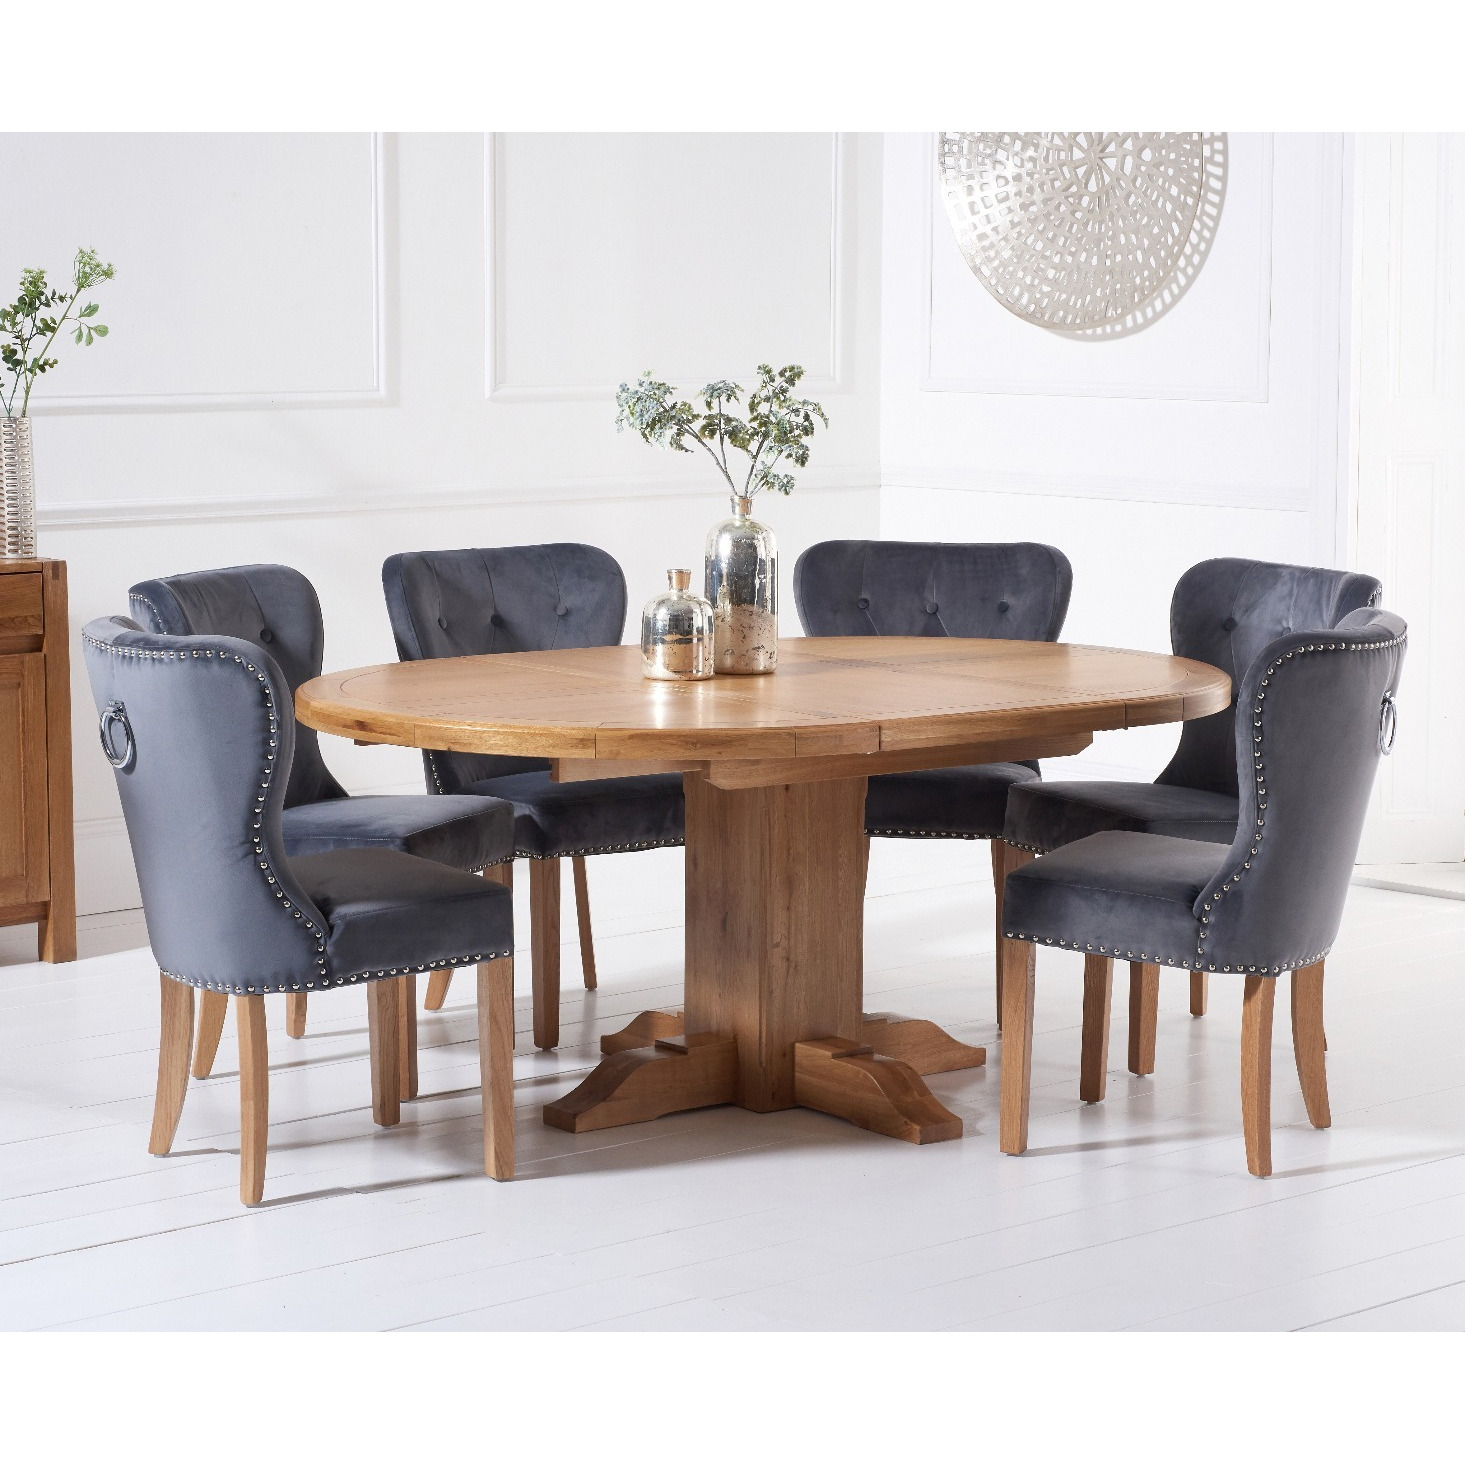 Hemsley Solid Oak Extending Pedestal Dining Table With 8 Grey Keswick Velvet Chairs